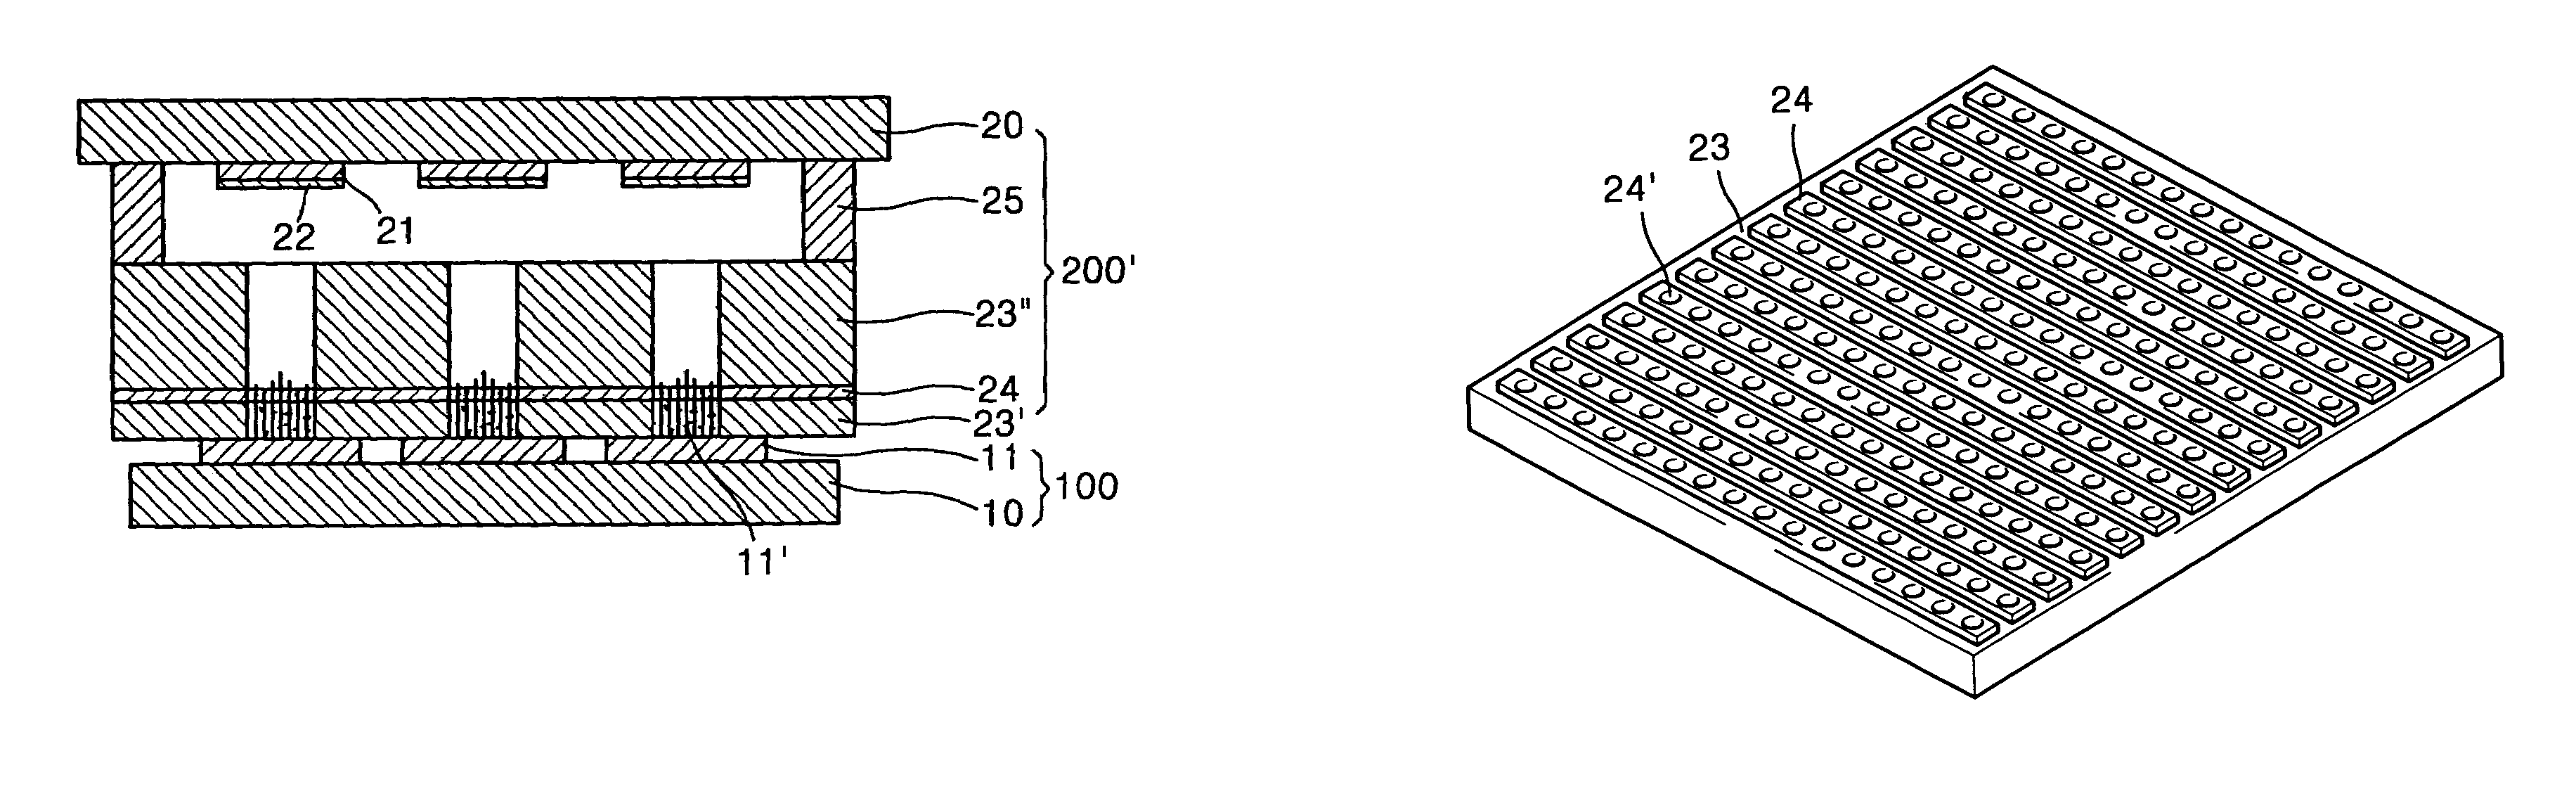 Field emission array with carbon nanotubes and method for fabricating the field emission array